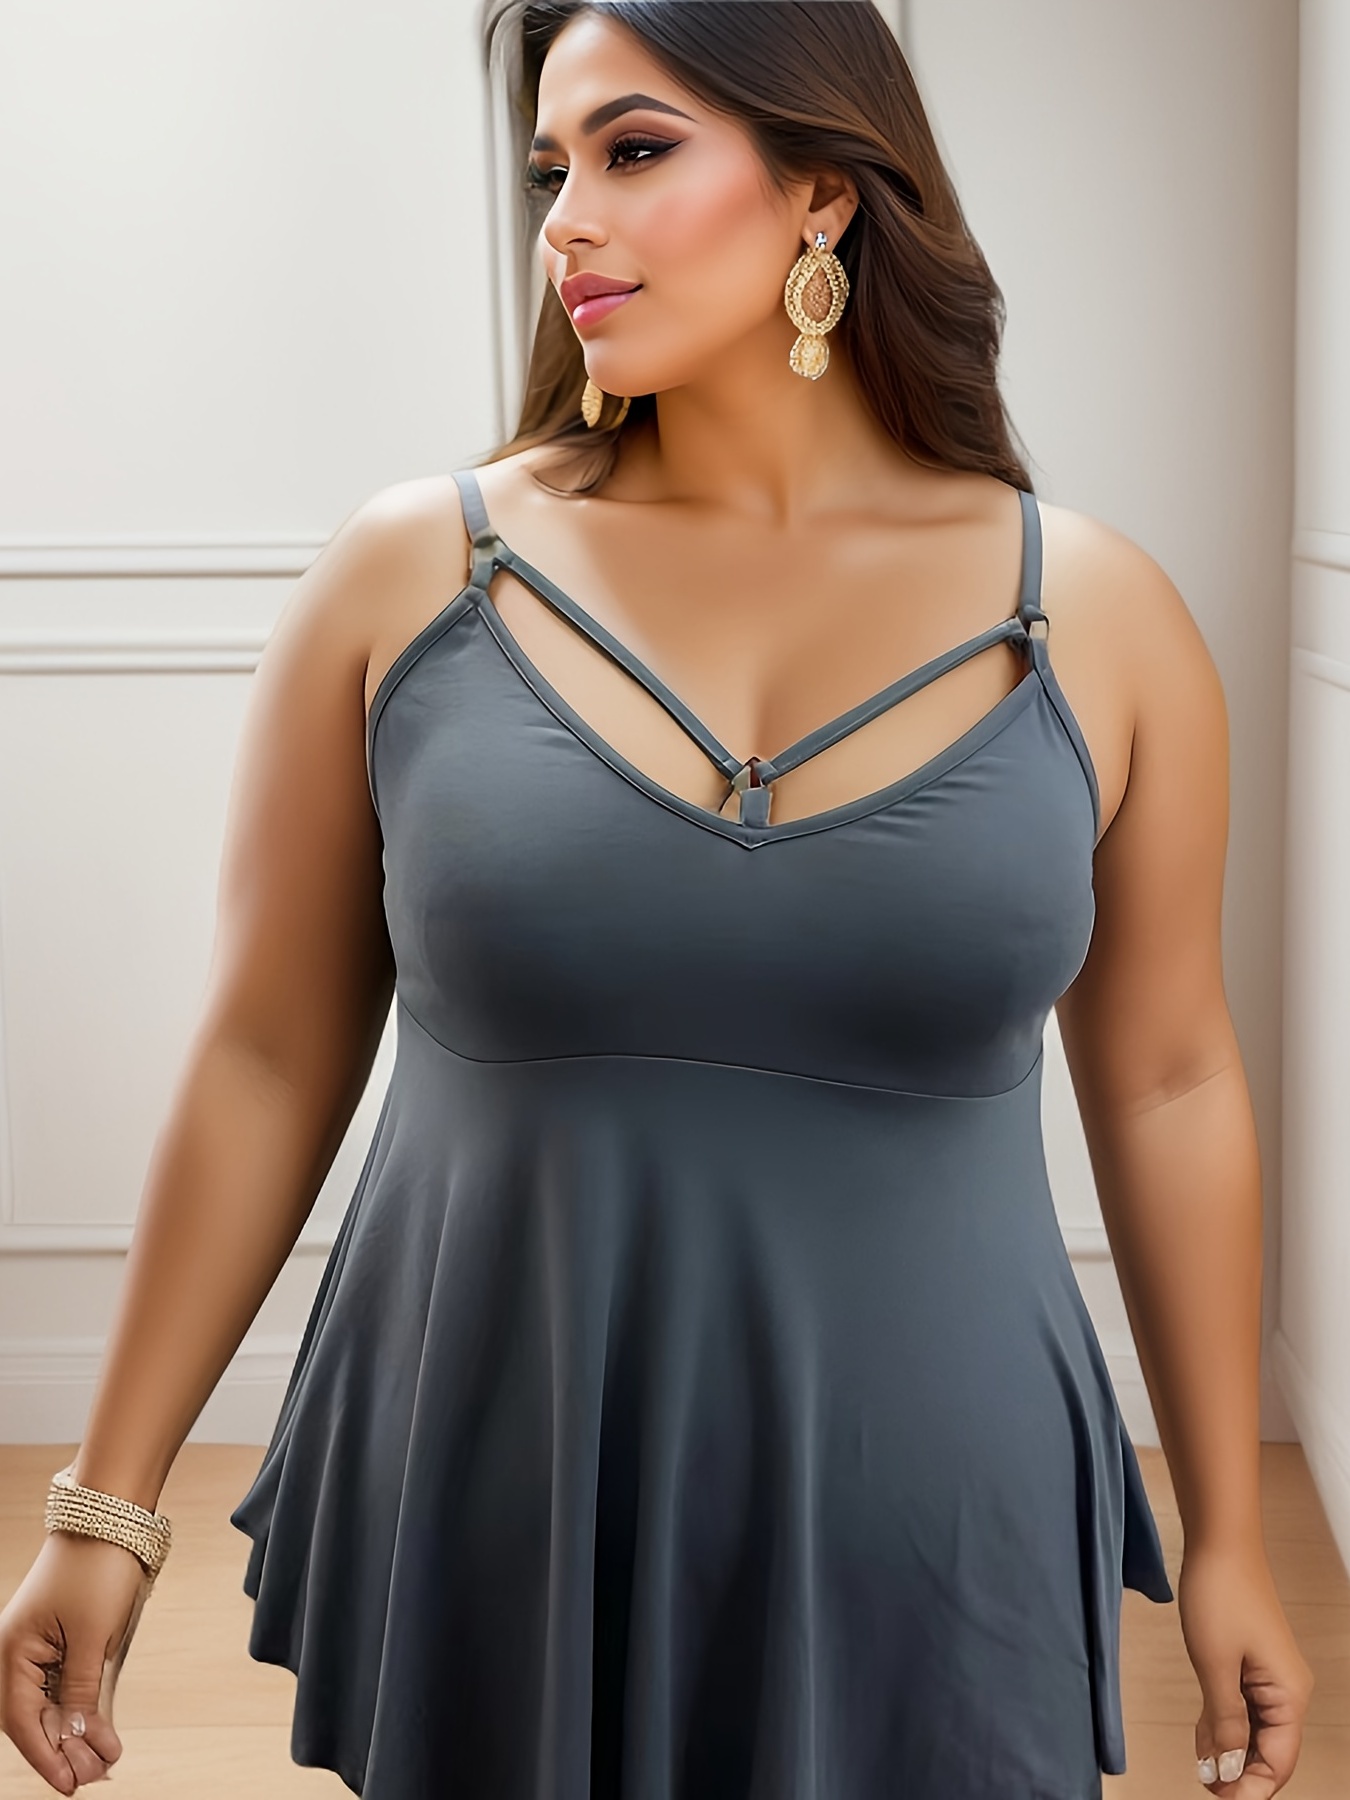 Plus Size Lady's Solid Seamless Long Cami Top/Dress, Charcoal